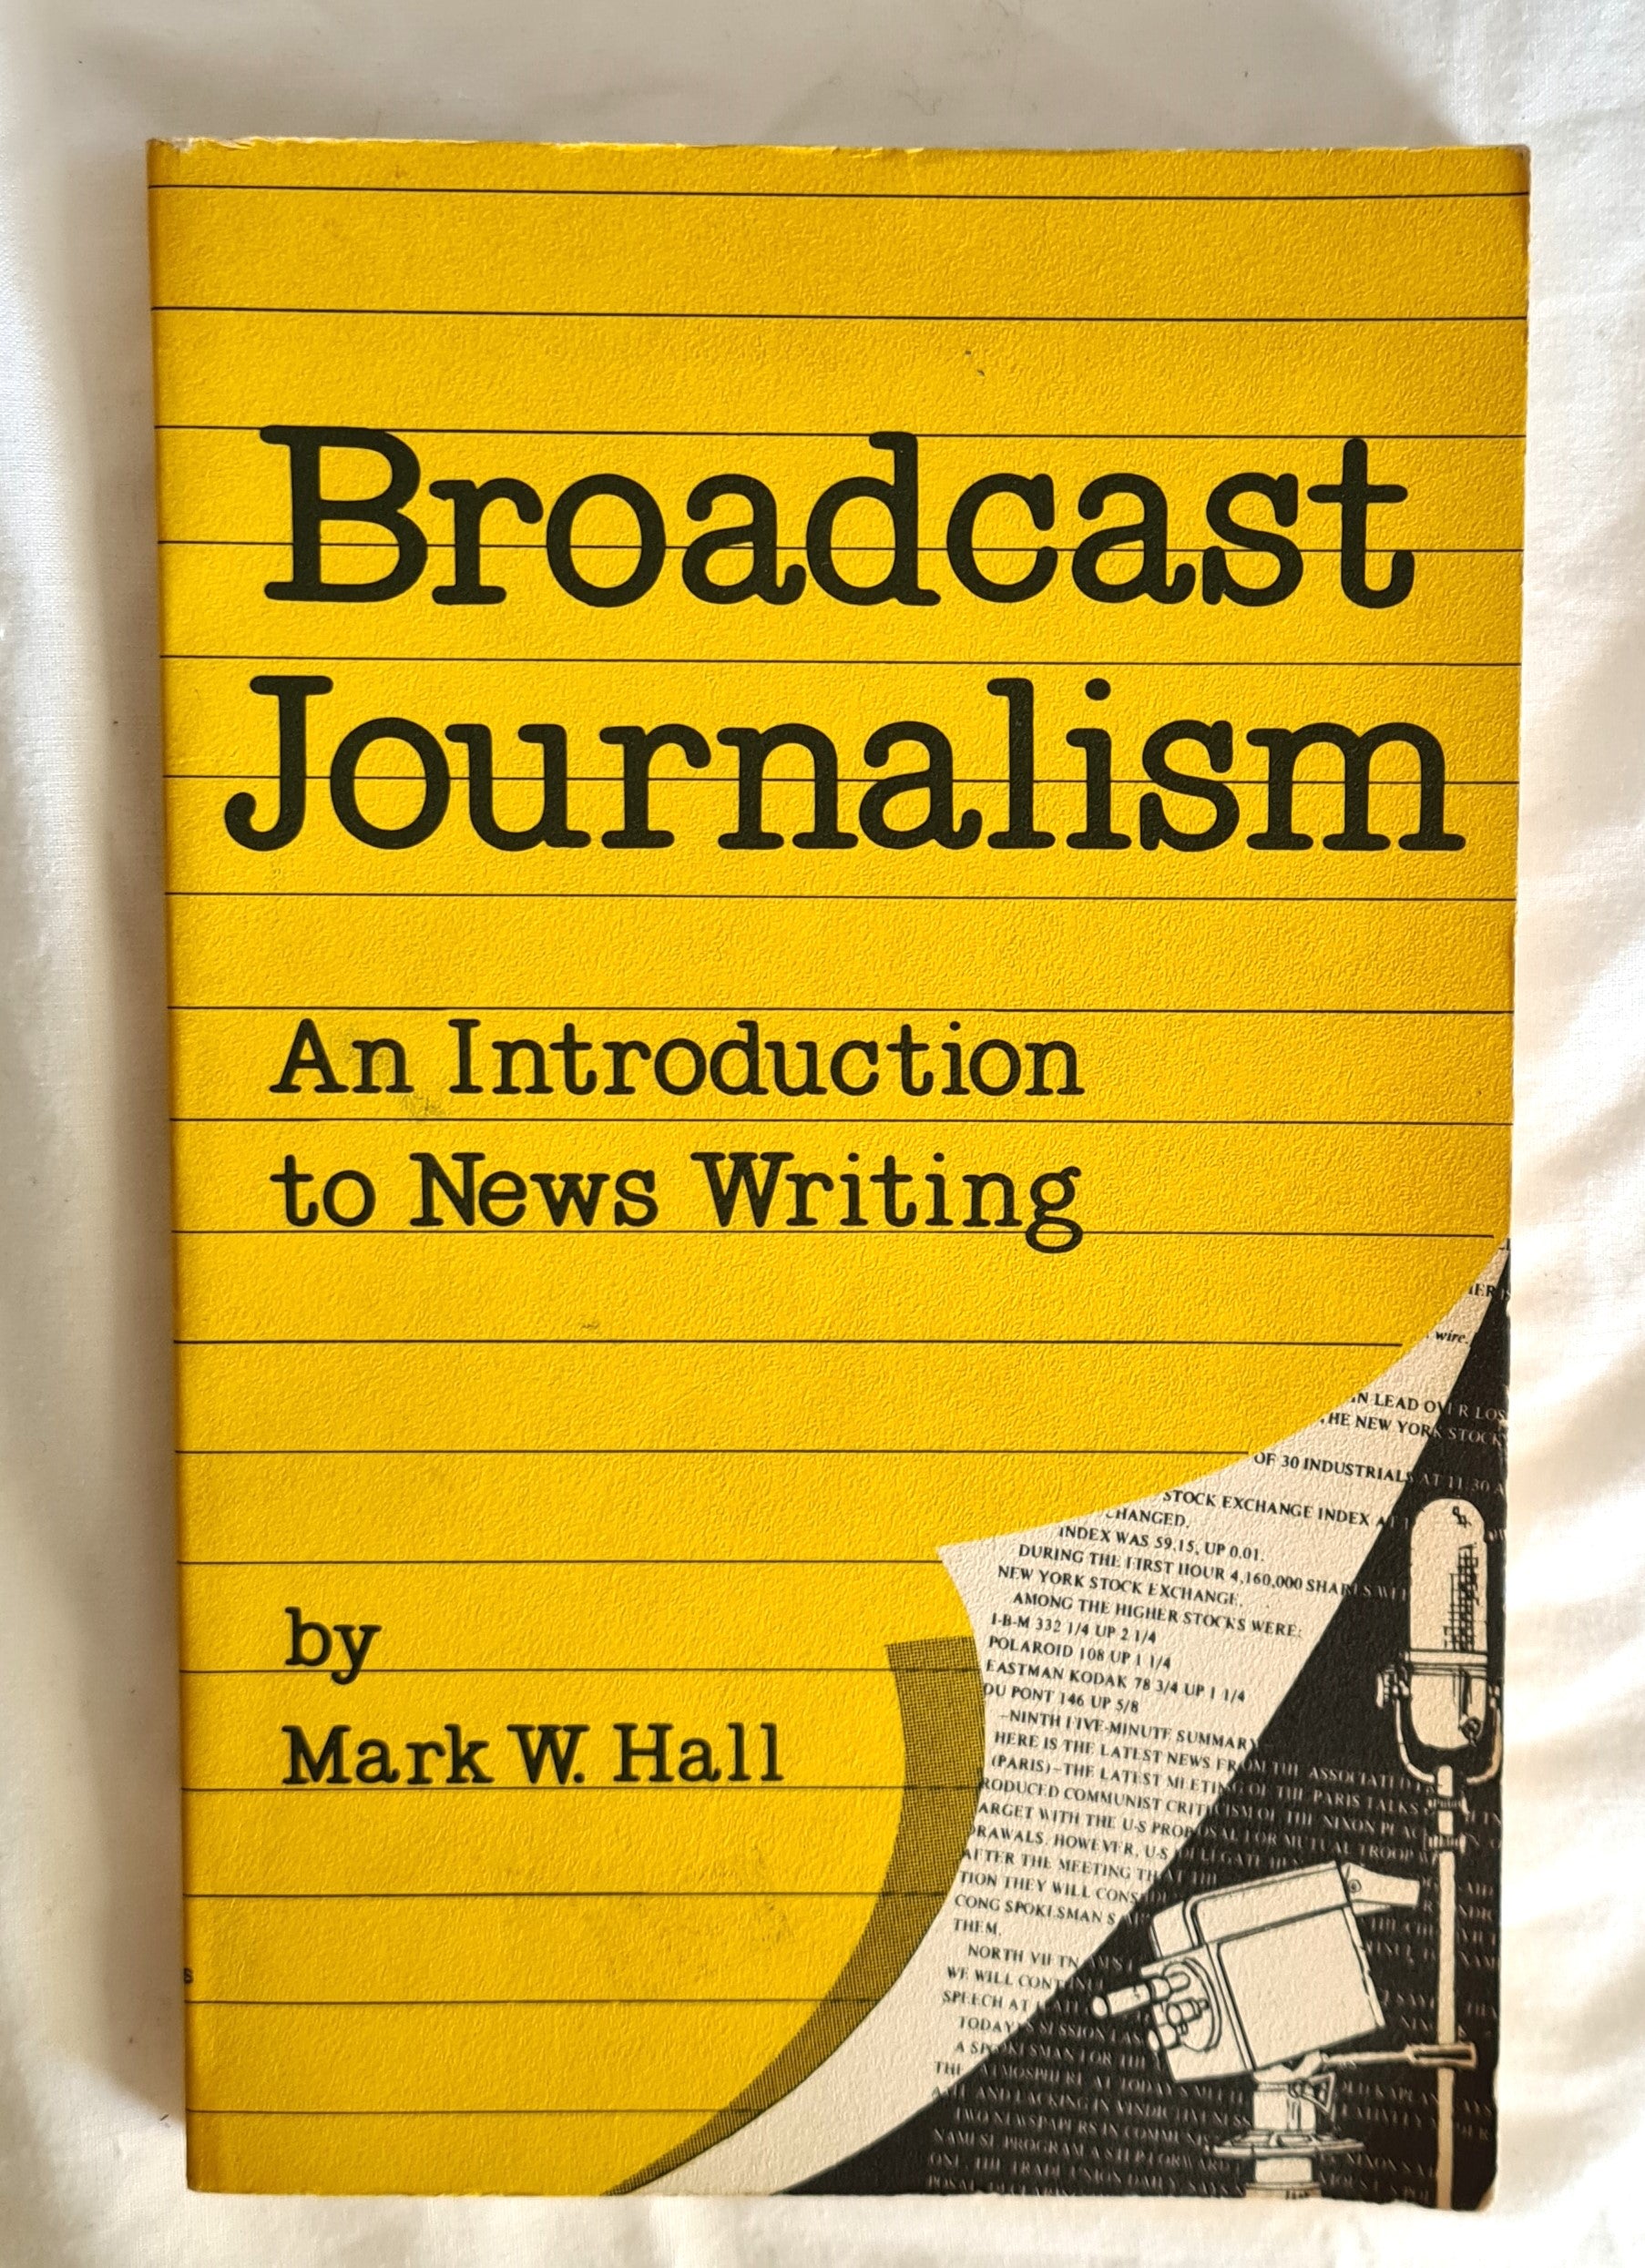 Broadcast Journalism  An Introduction to News Writing  by Mark W. Hall